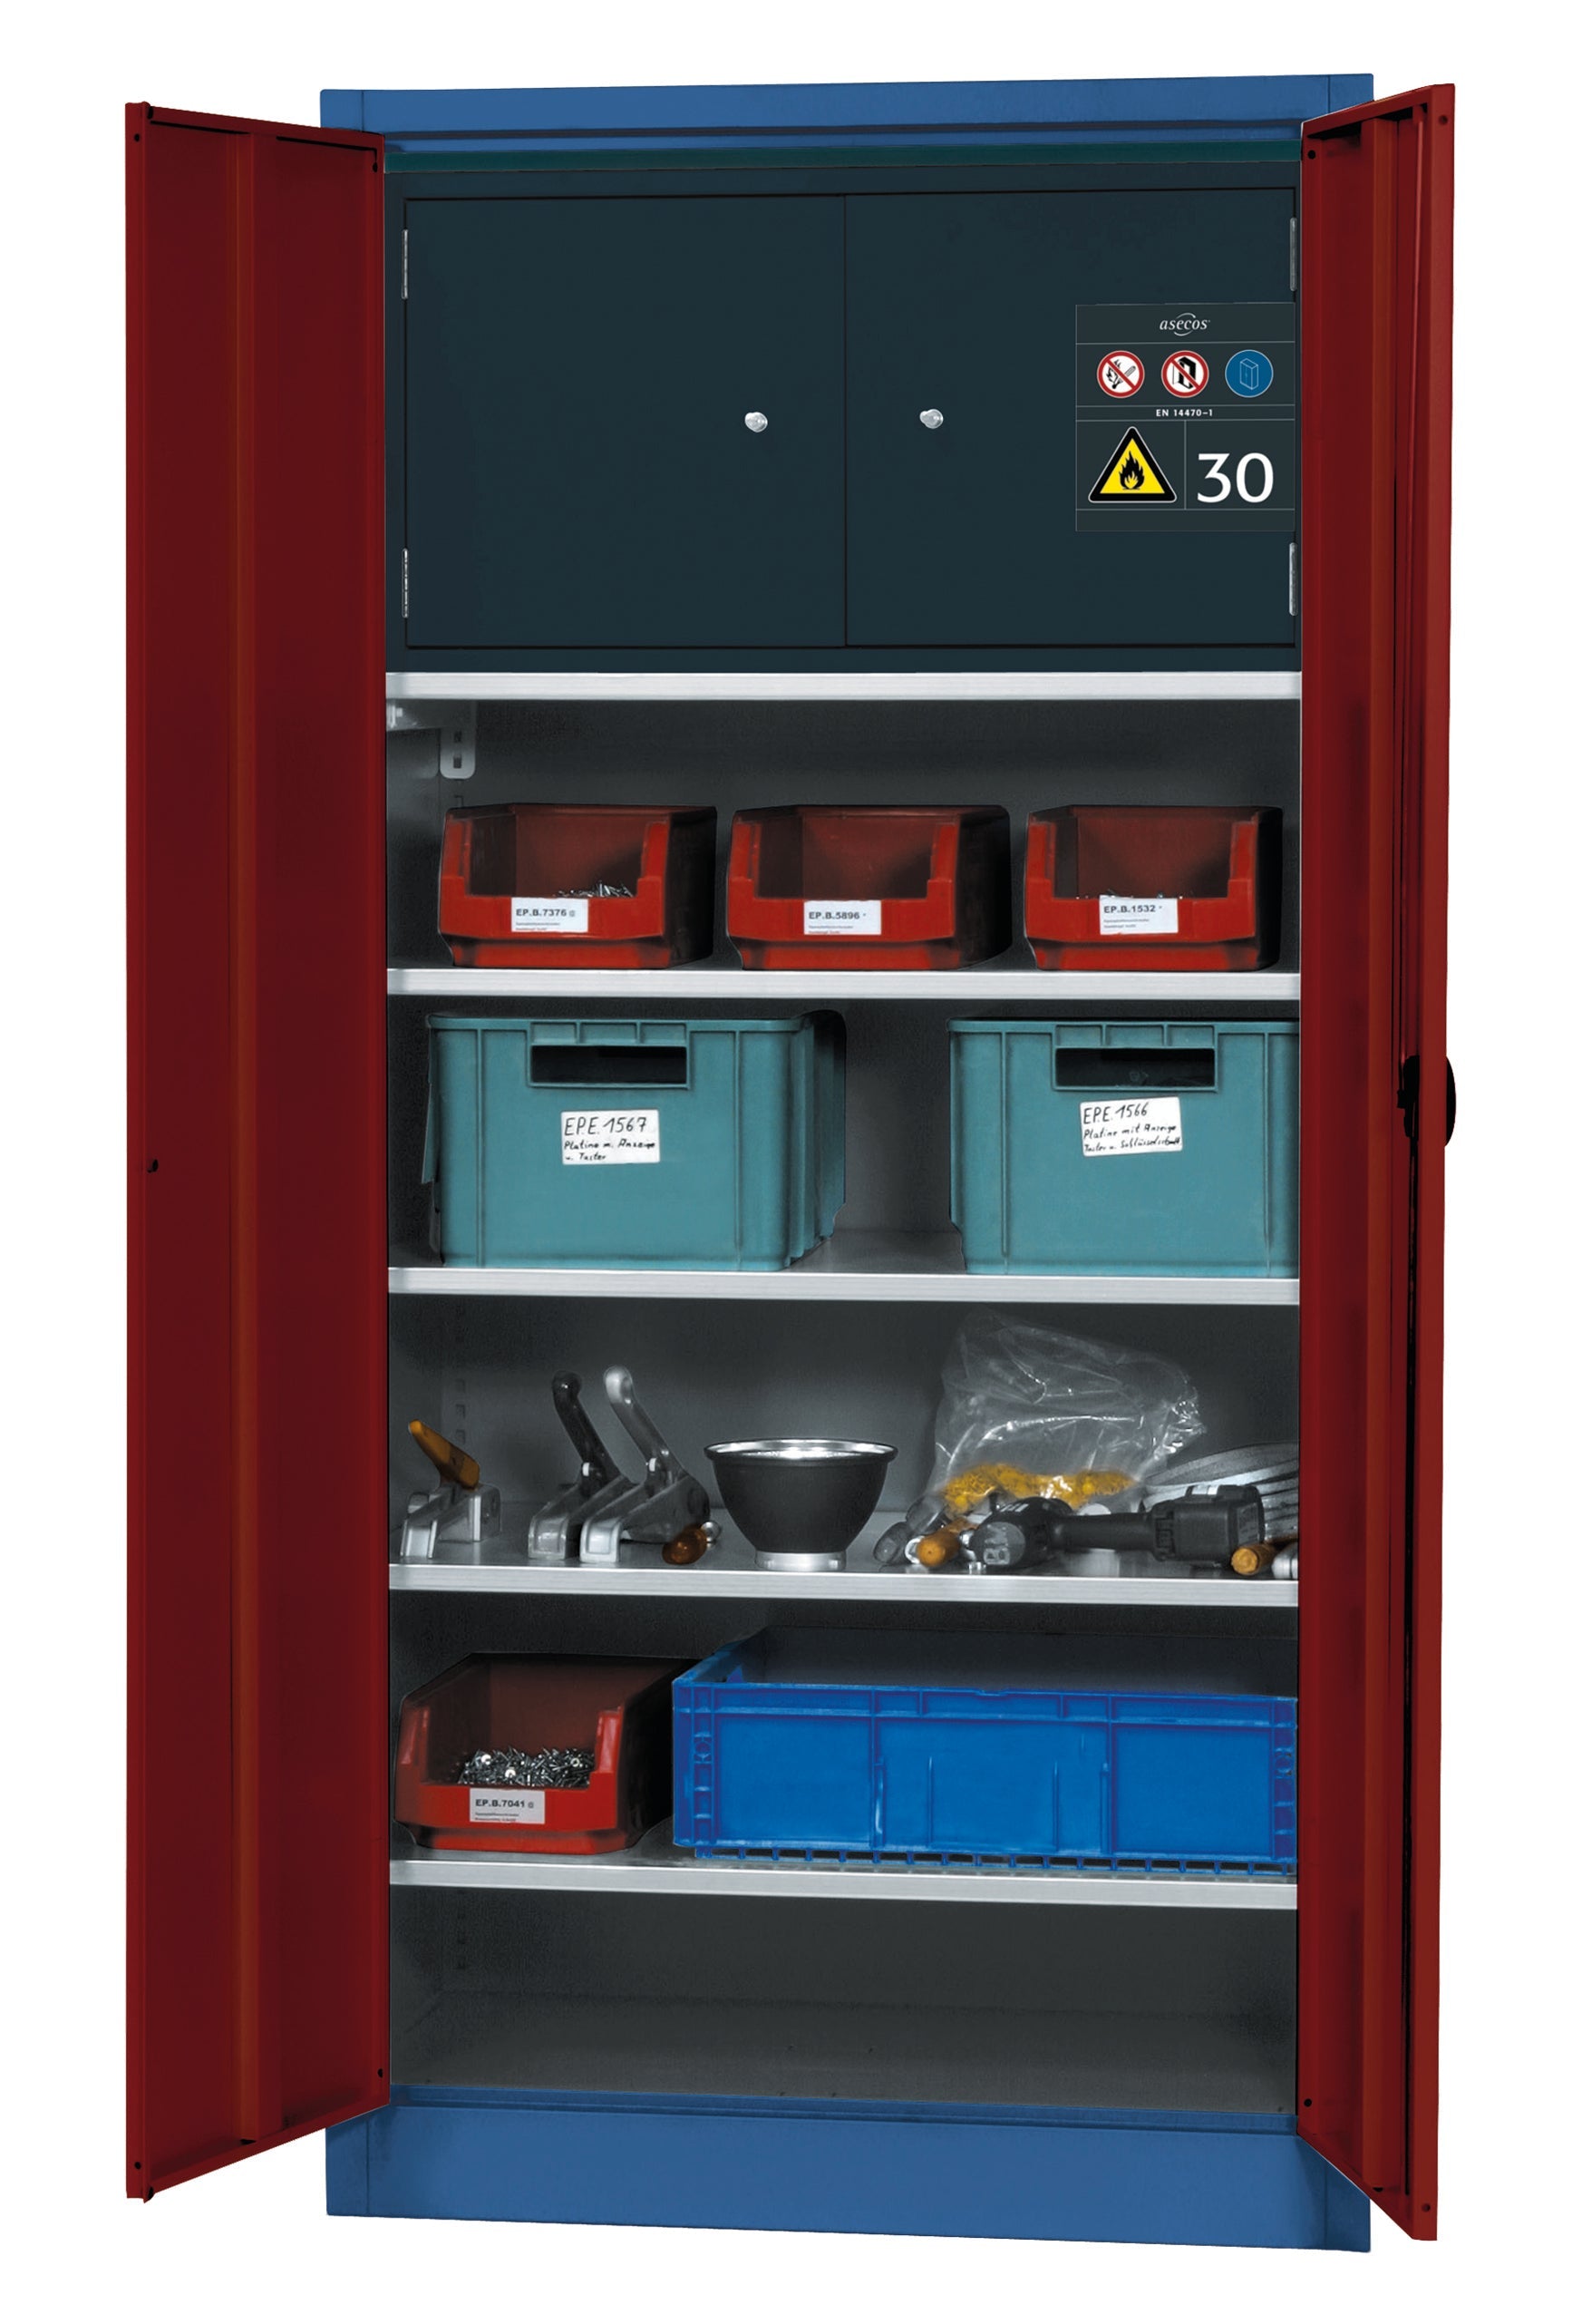 Material cabinet E-CLASSIC-MF model EM.195.095.F (incl. Type 30 box) in purple red RAL 3004 with 4x standard shelves (sheet steel)